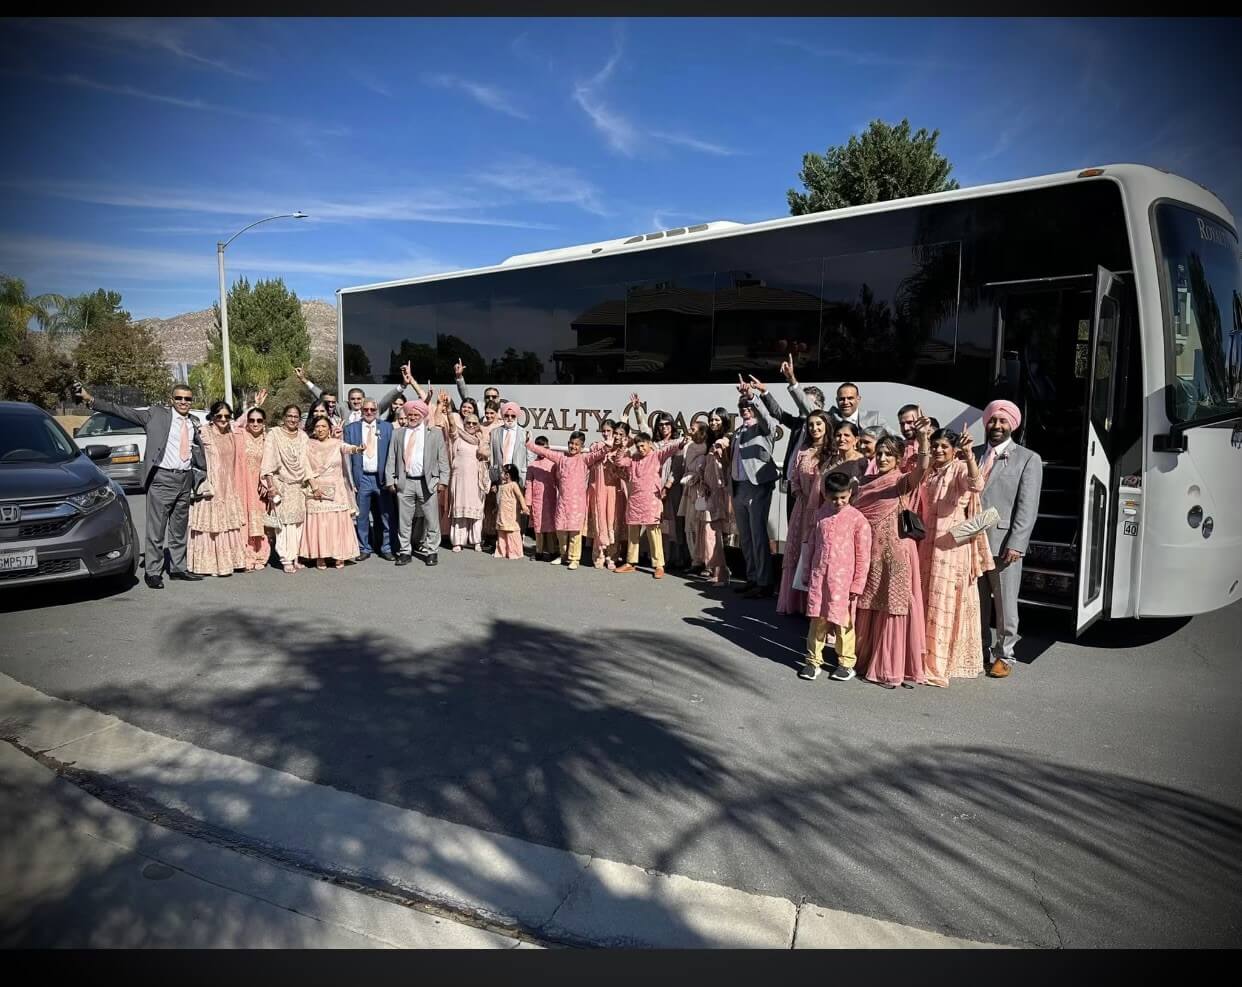 Limo Party Bus Rental Services Fresno CA Shuttle and Charter Buses